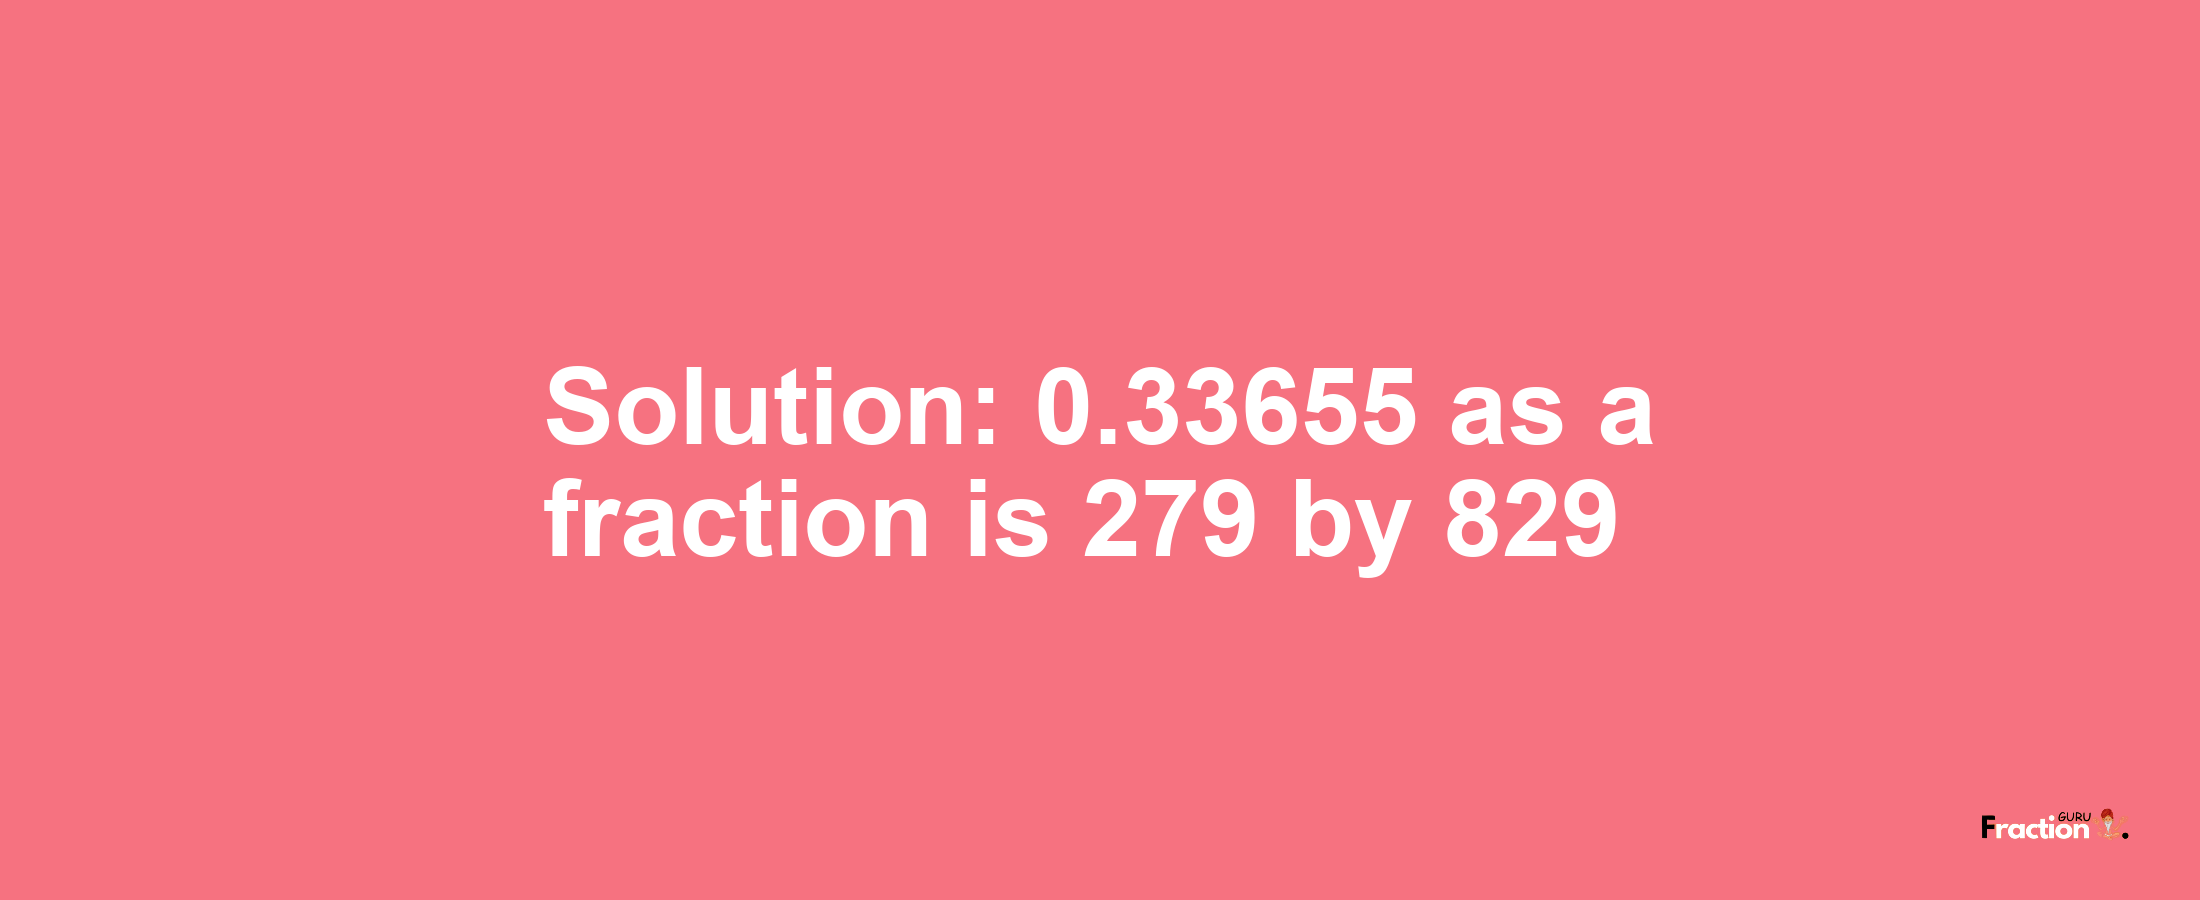 Solution:0.33655 as a fraction is 279/829